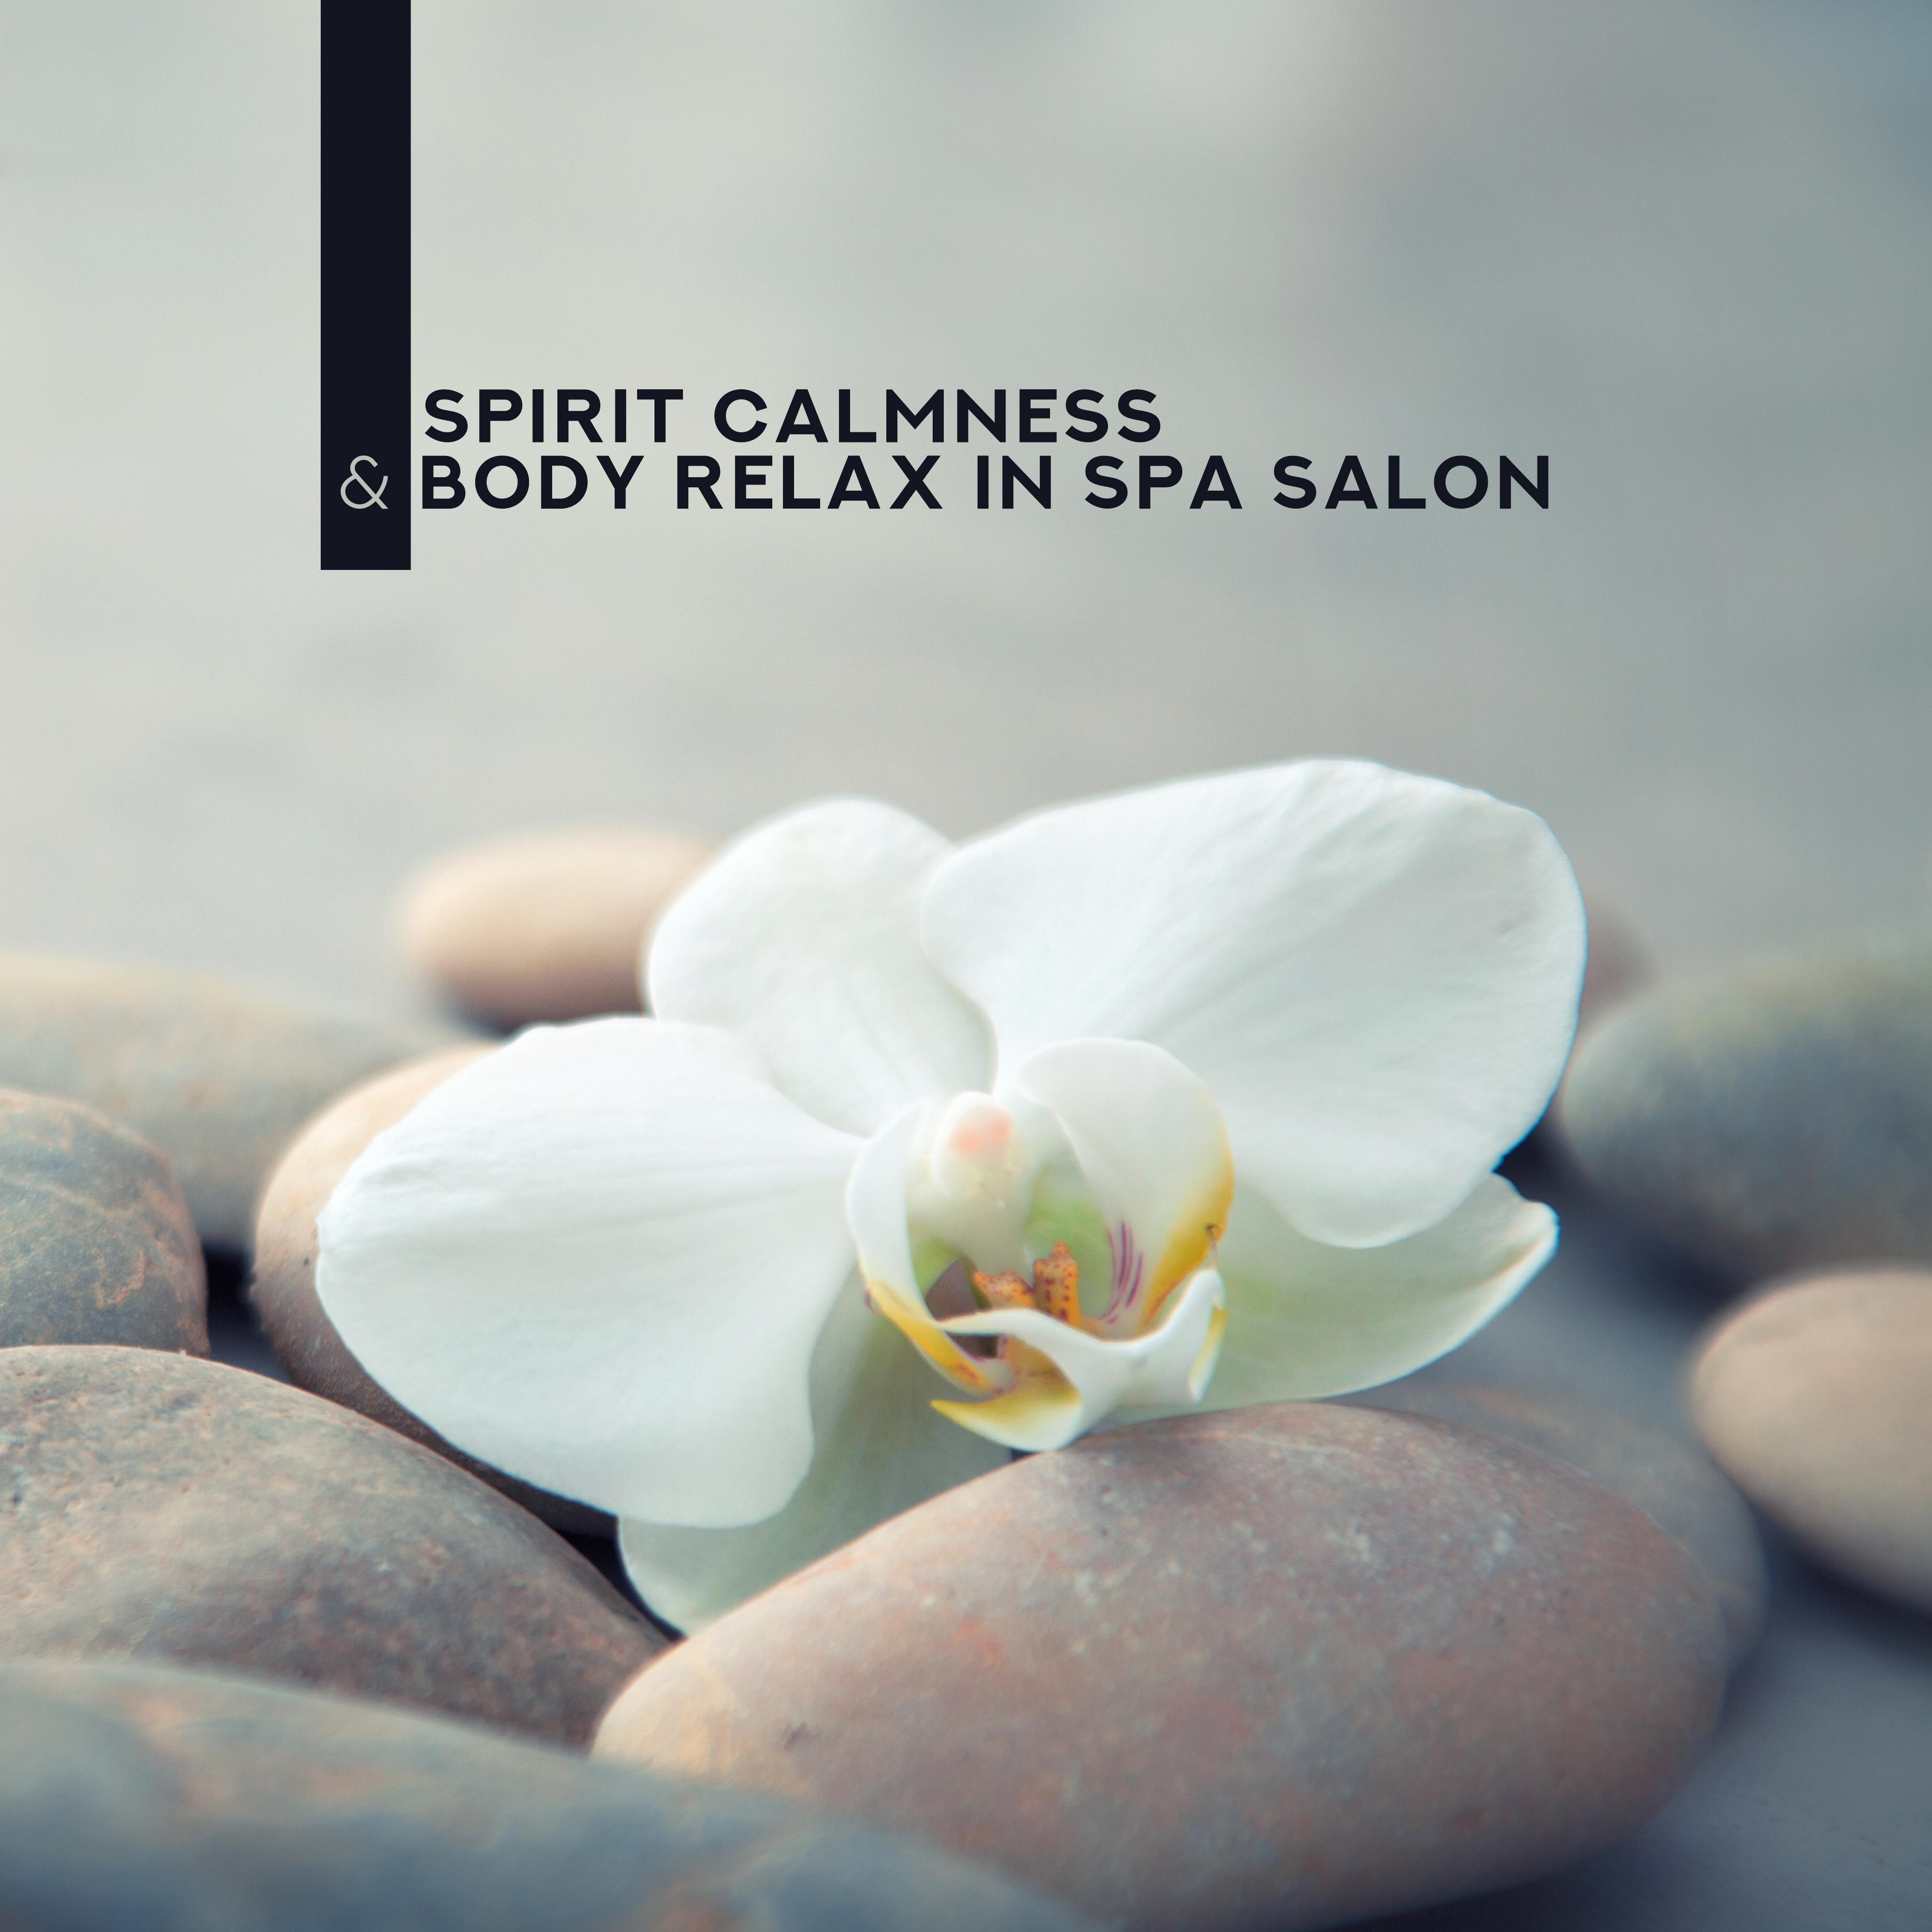 Spirit Calmness & Body Relax in Spa Salon: Relaxing 2019 New Age Music for Spa & Wellness, Aromatherapy, Massage Session, Sauna, Hot Baths